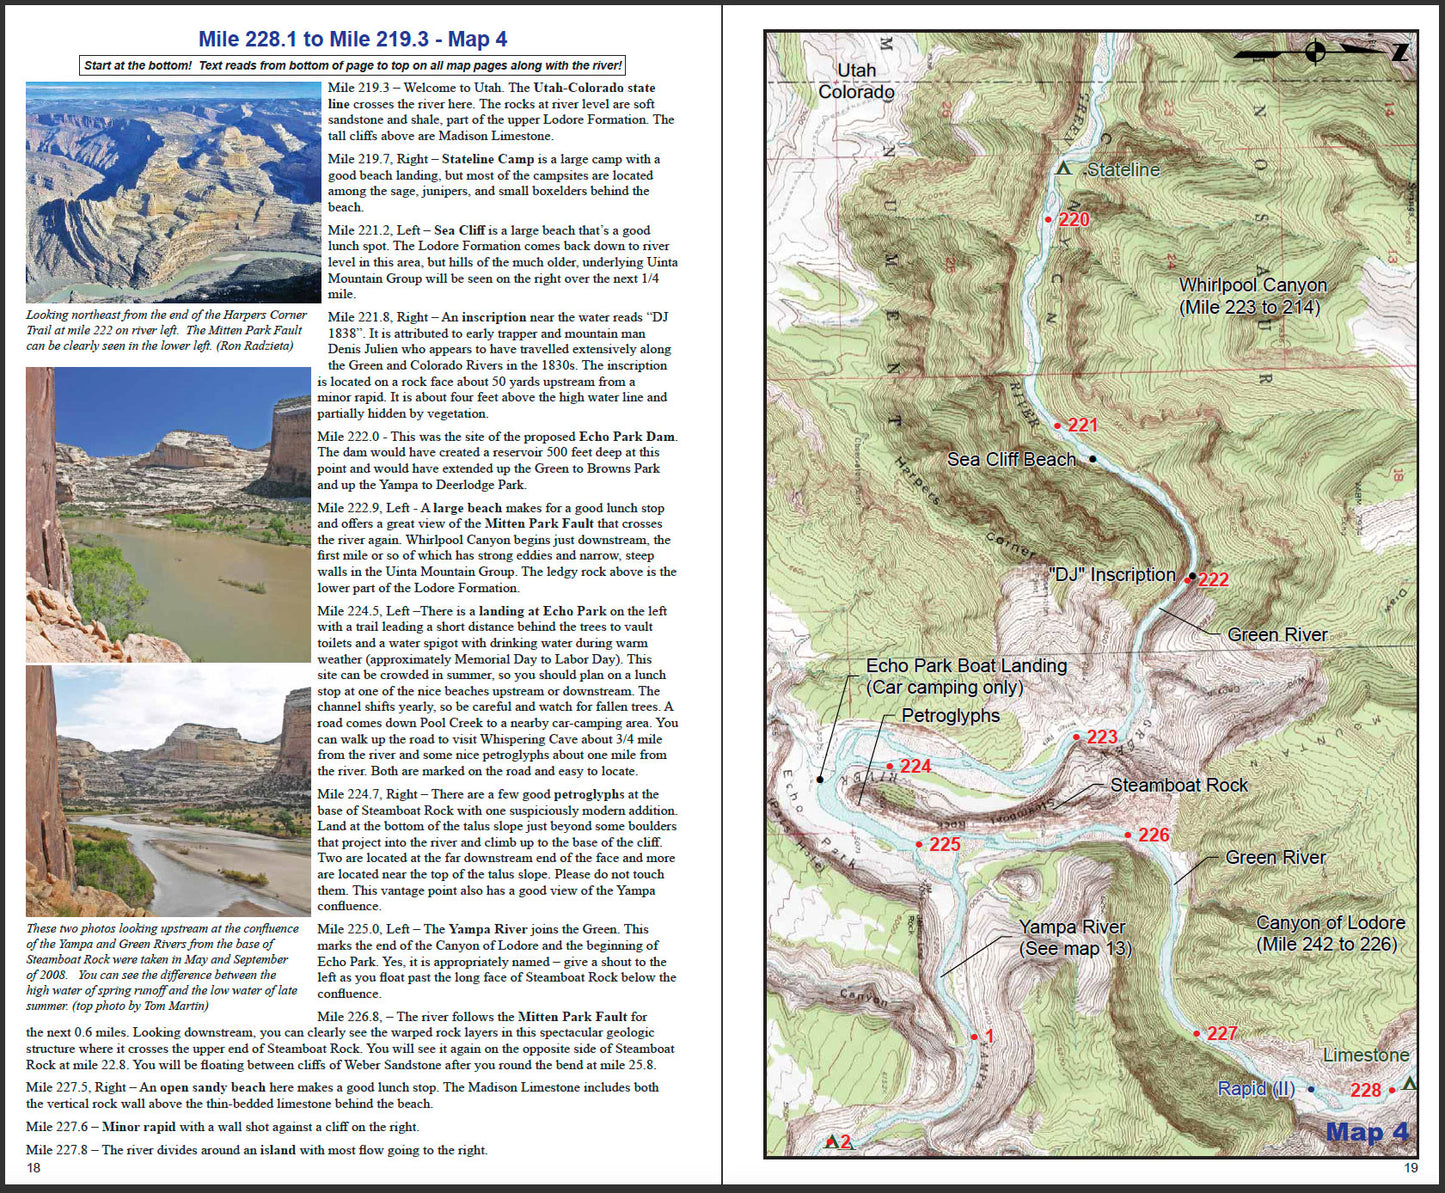 Waterproof Rivermaps Guide to the Green and Yampa Rivers in Dinosaur National Monument trail guide book.